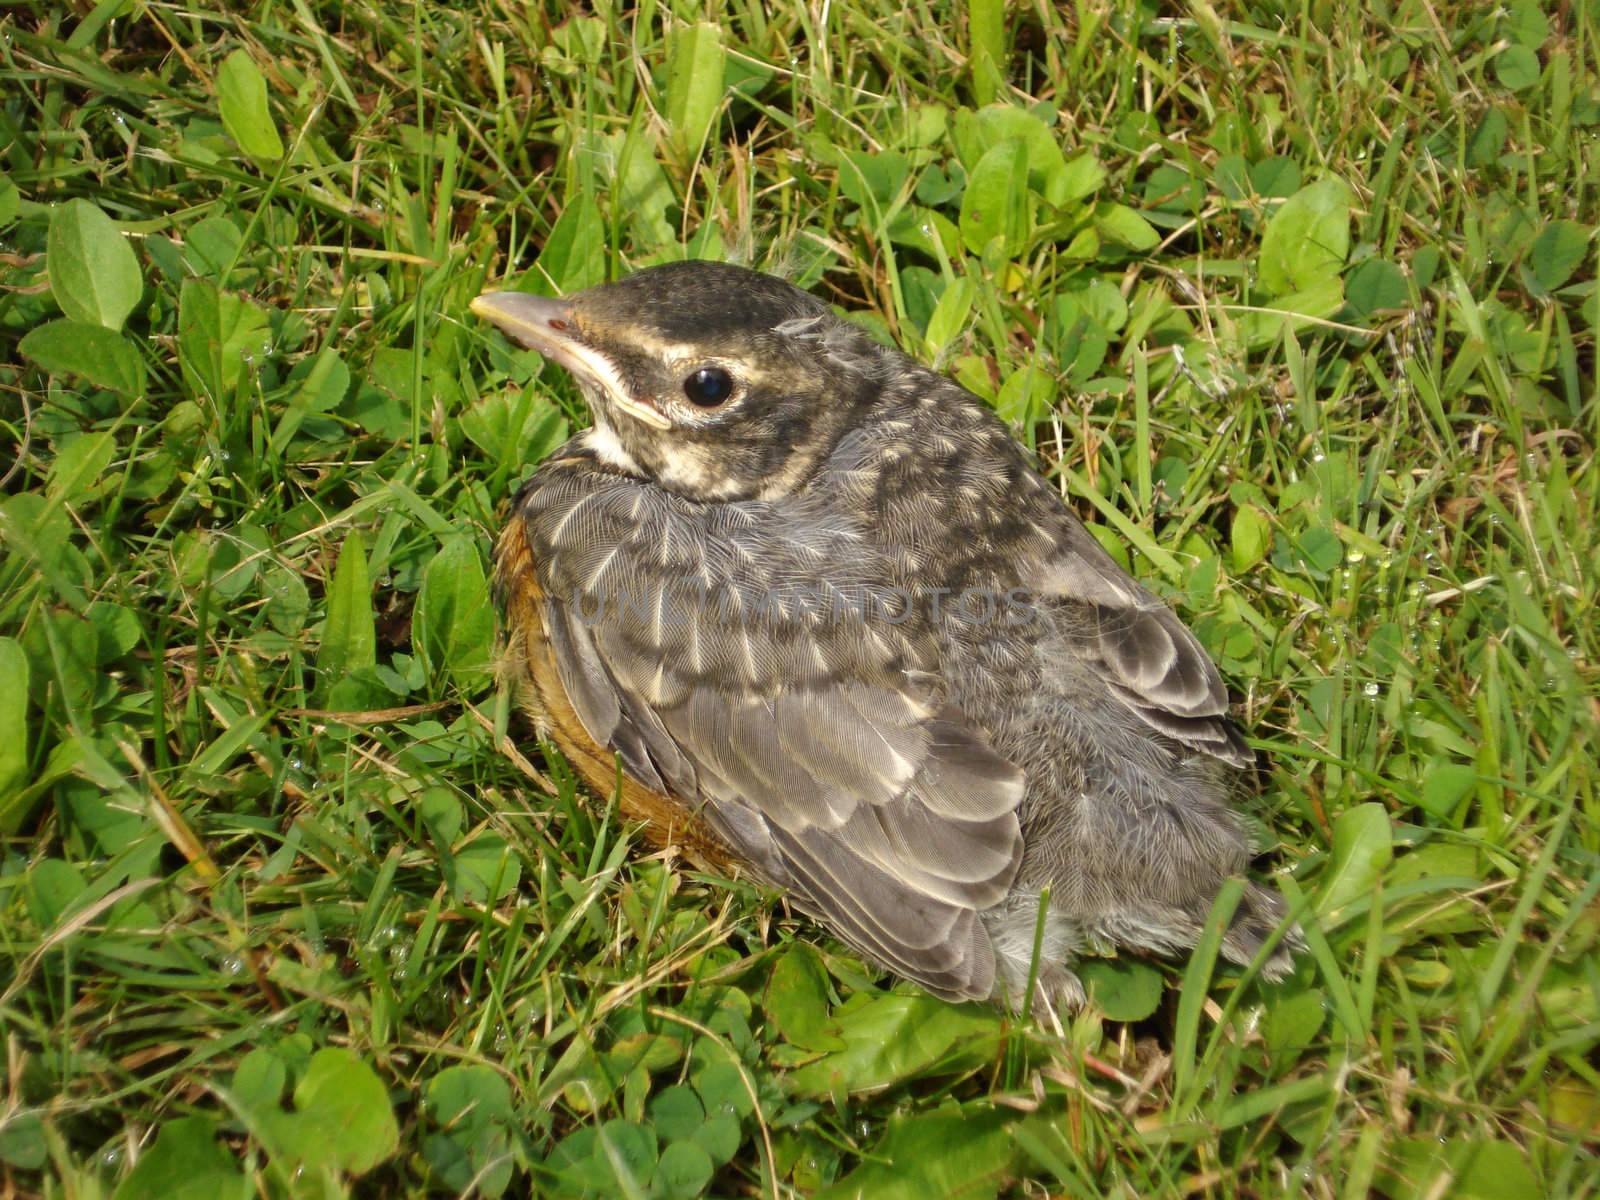 A young robin is resting on the grass, shot from above.                               